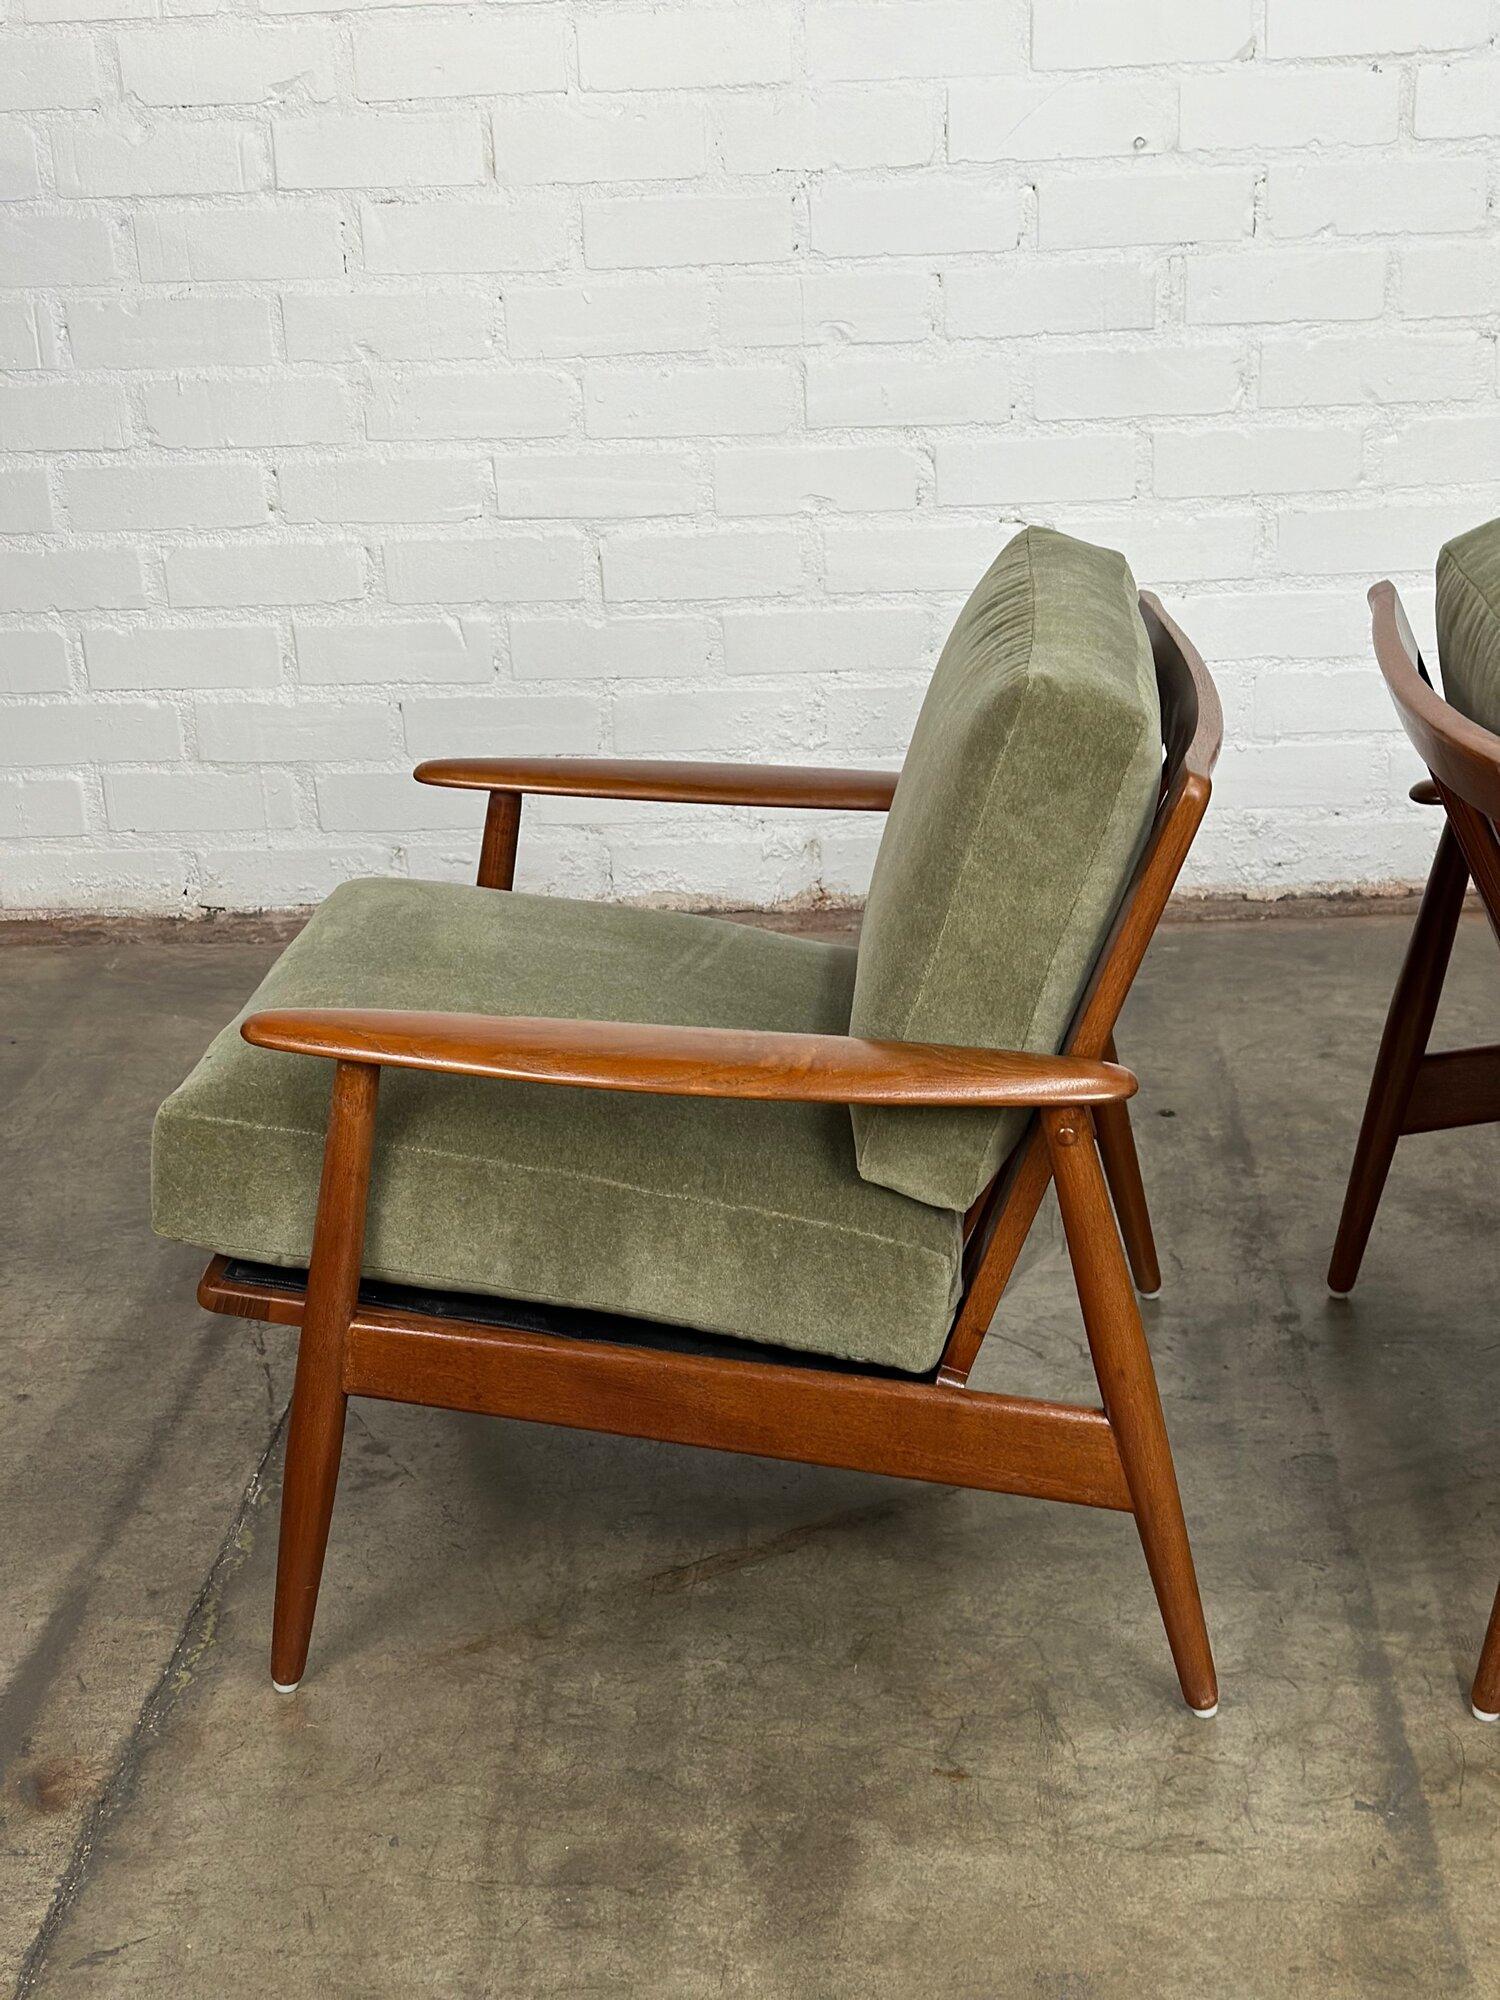 W30 D30 H26.5 SW22 SD19 SH20.

Fully restored solid teak lounge chairs by Morredi. Chairs have original manufacture tag and frames are structurally sound and sturdy. New cushions have been made in a thick green mohair. Price is per chair. 

New